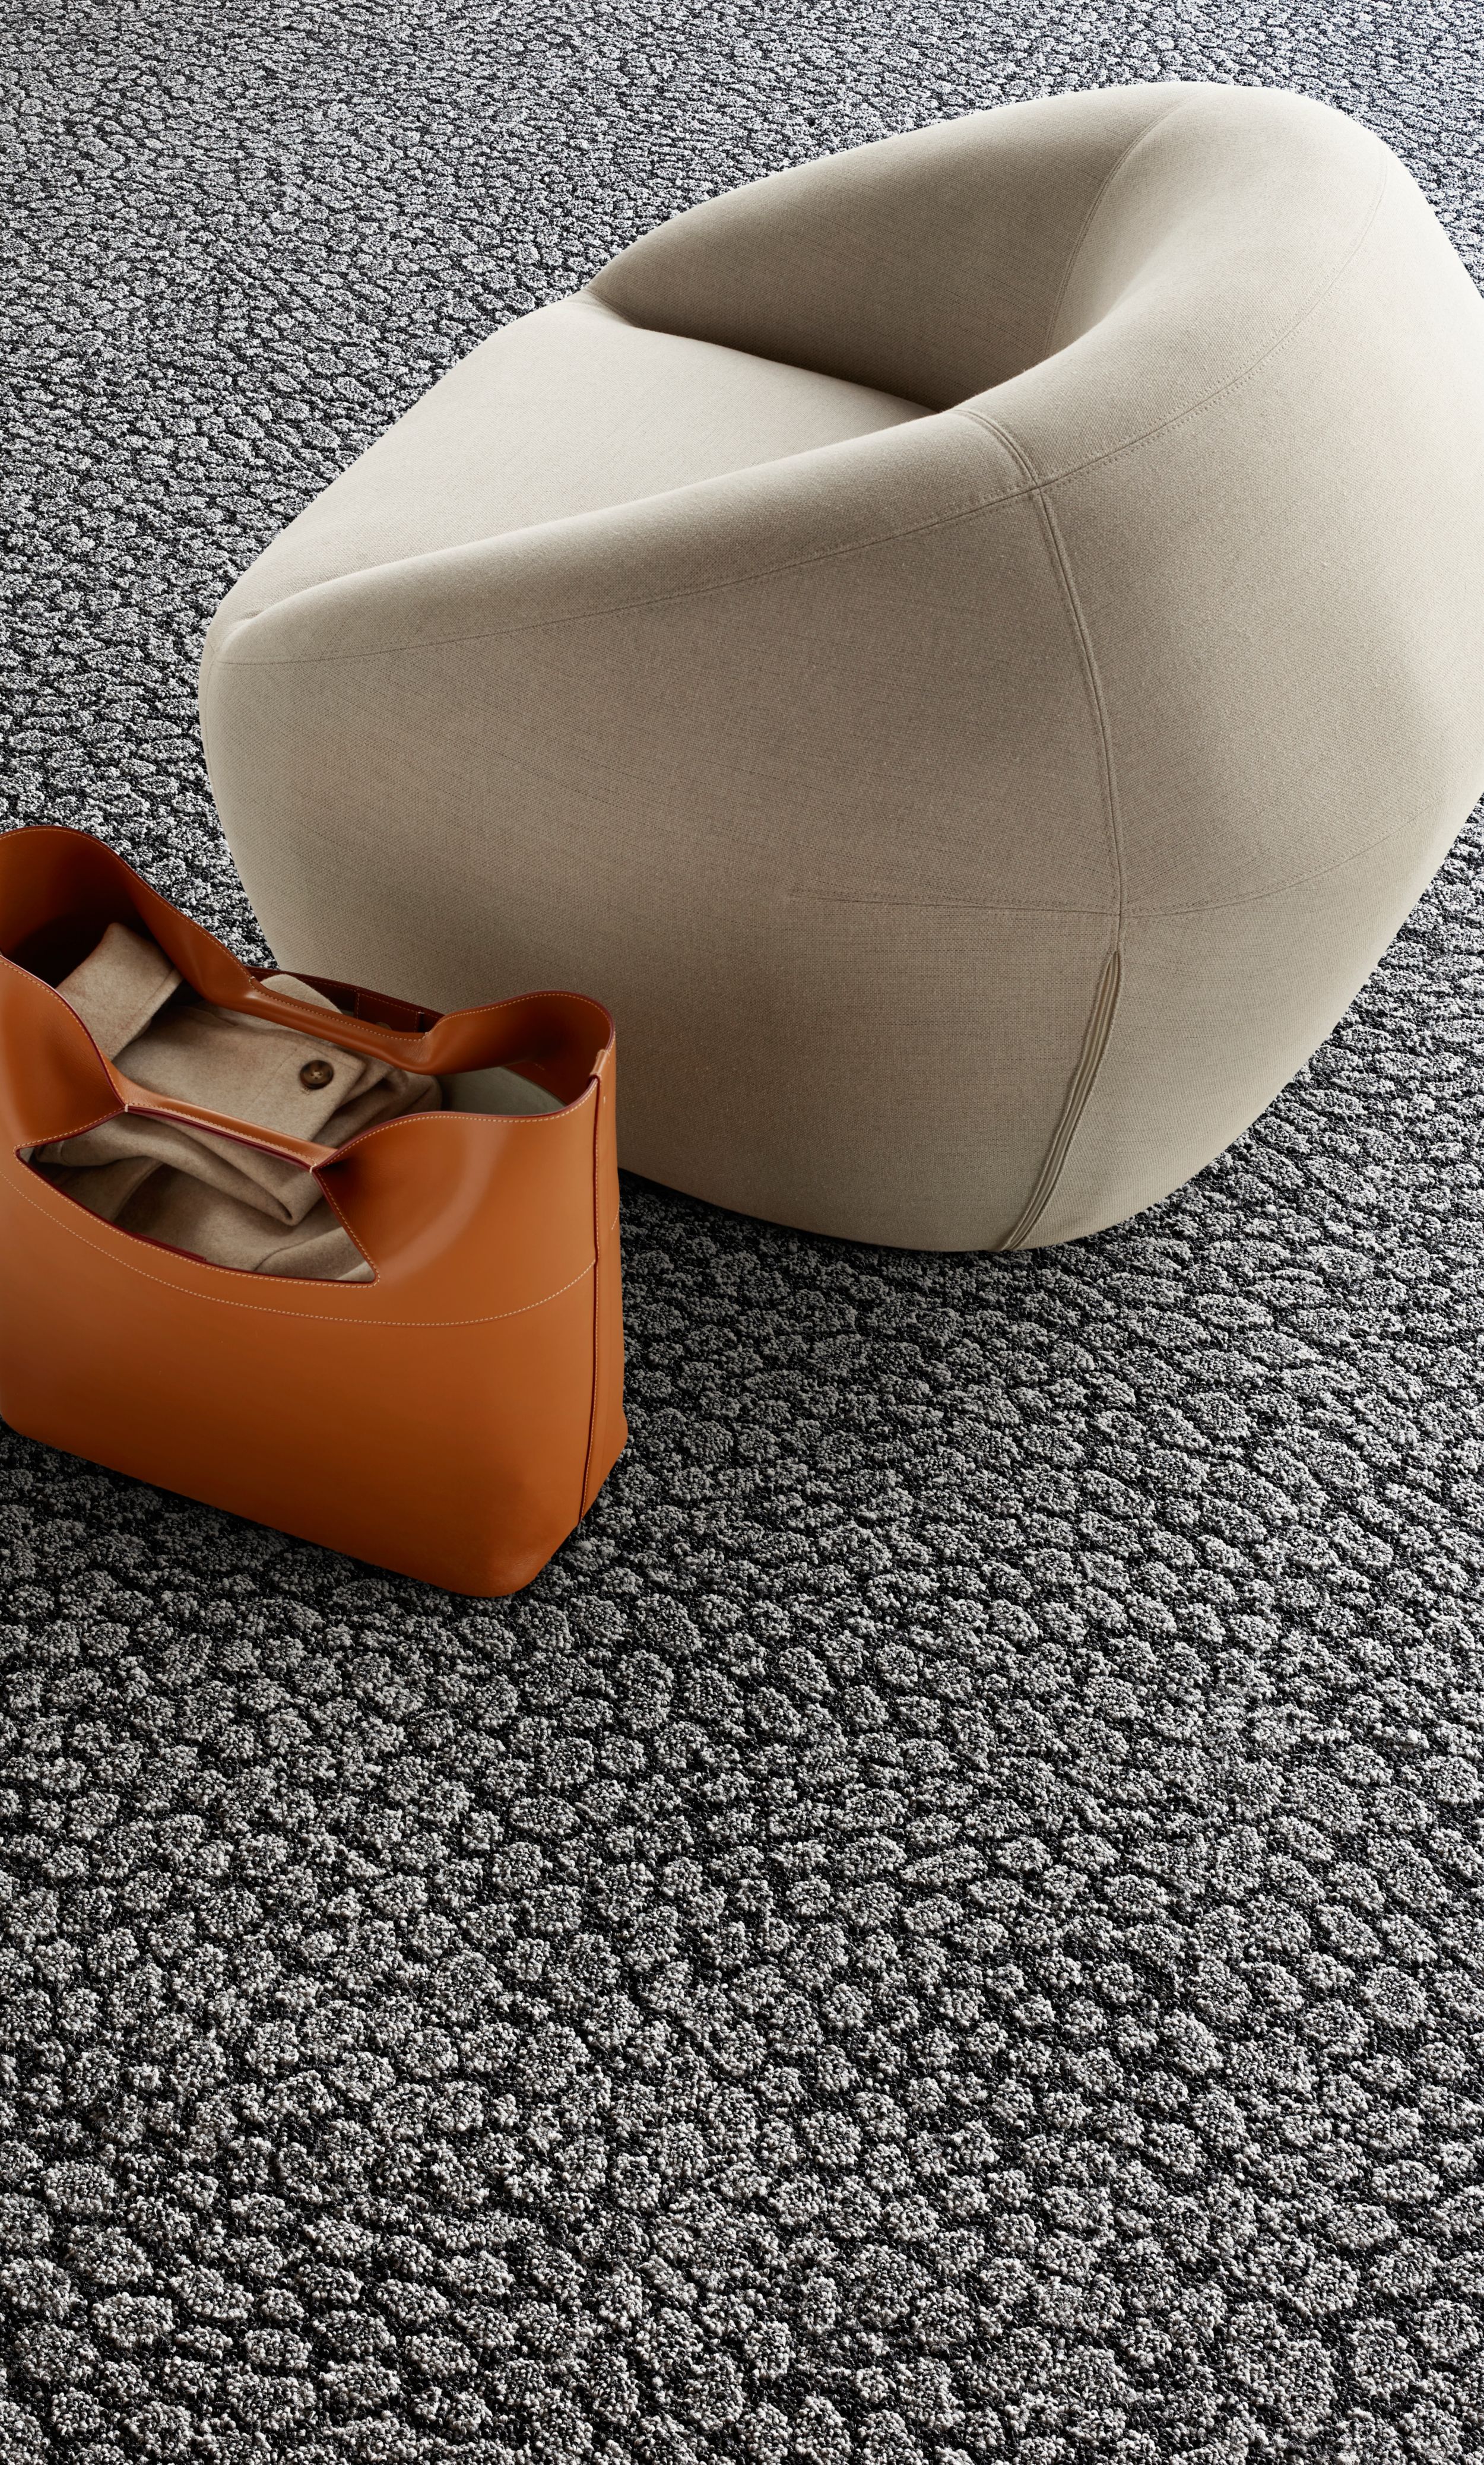 image Interface E611 carpet tile detail with low chair and orange tote numéro 2